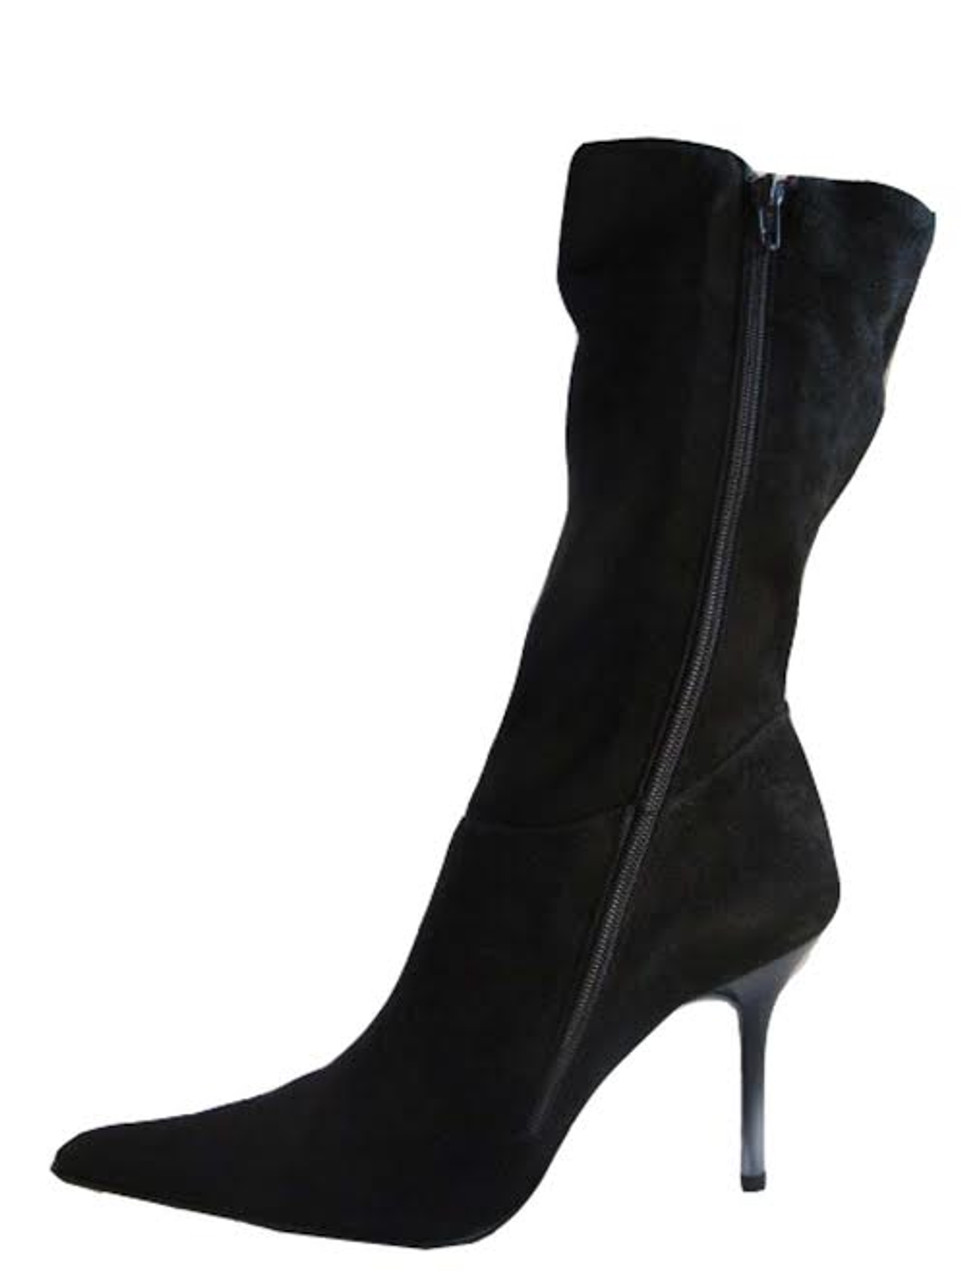 calf high boots with dress